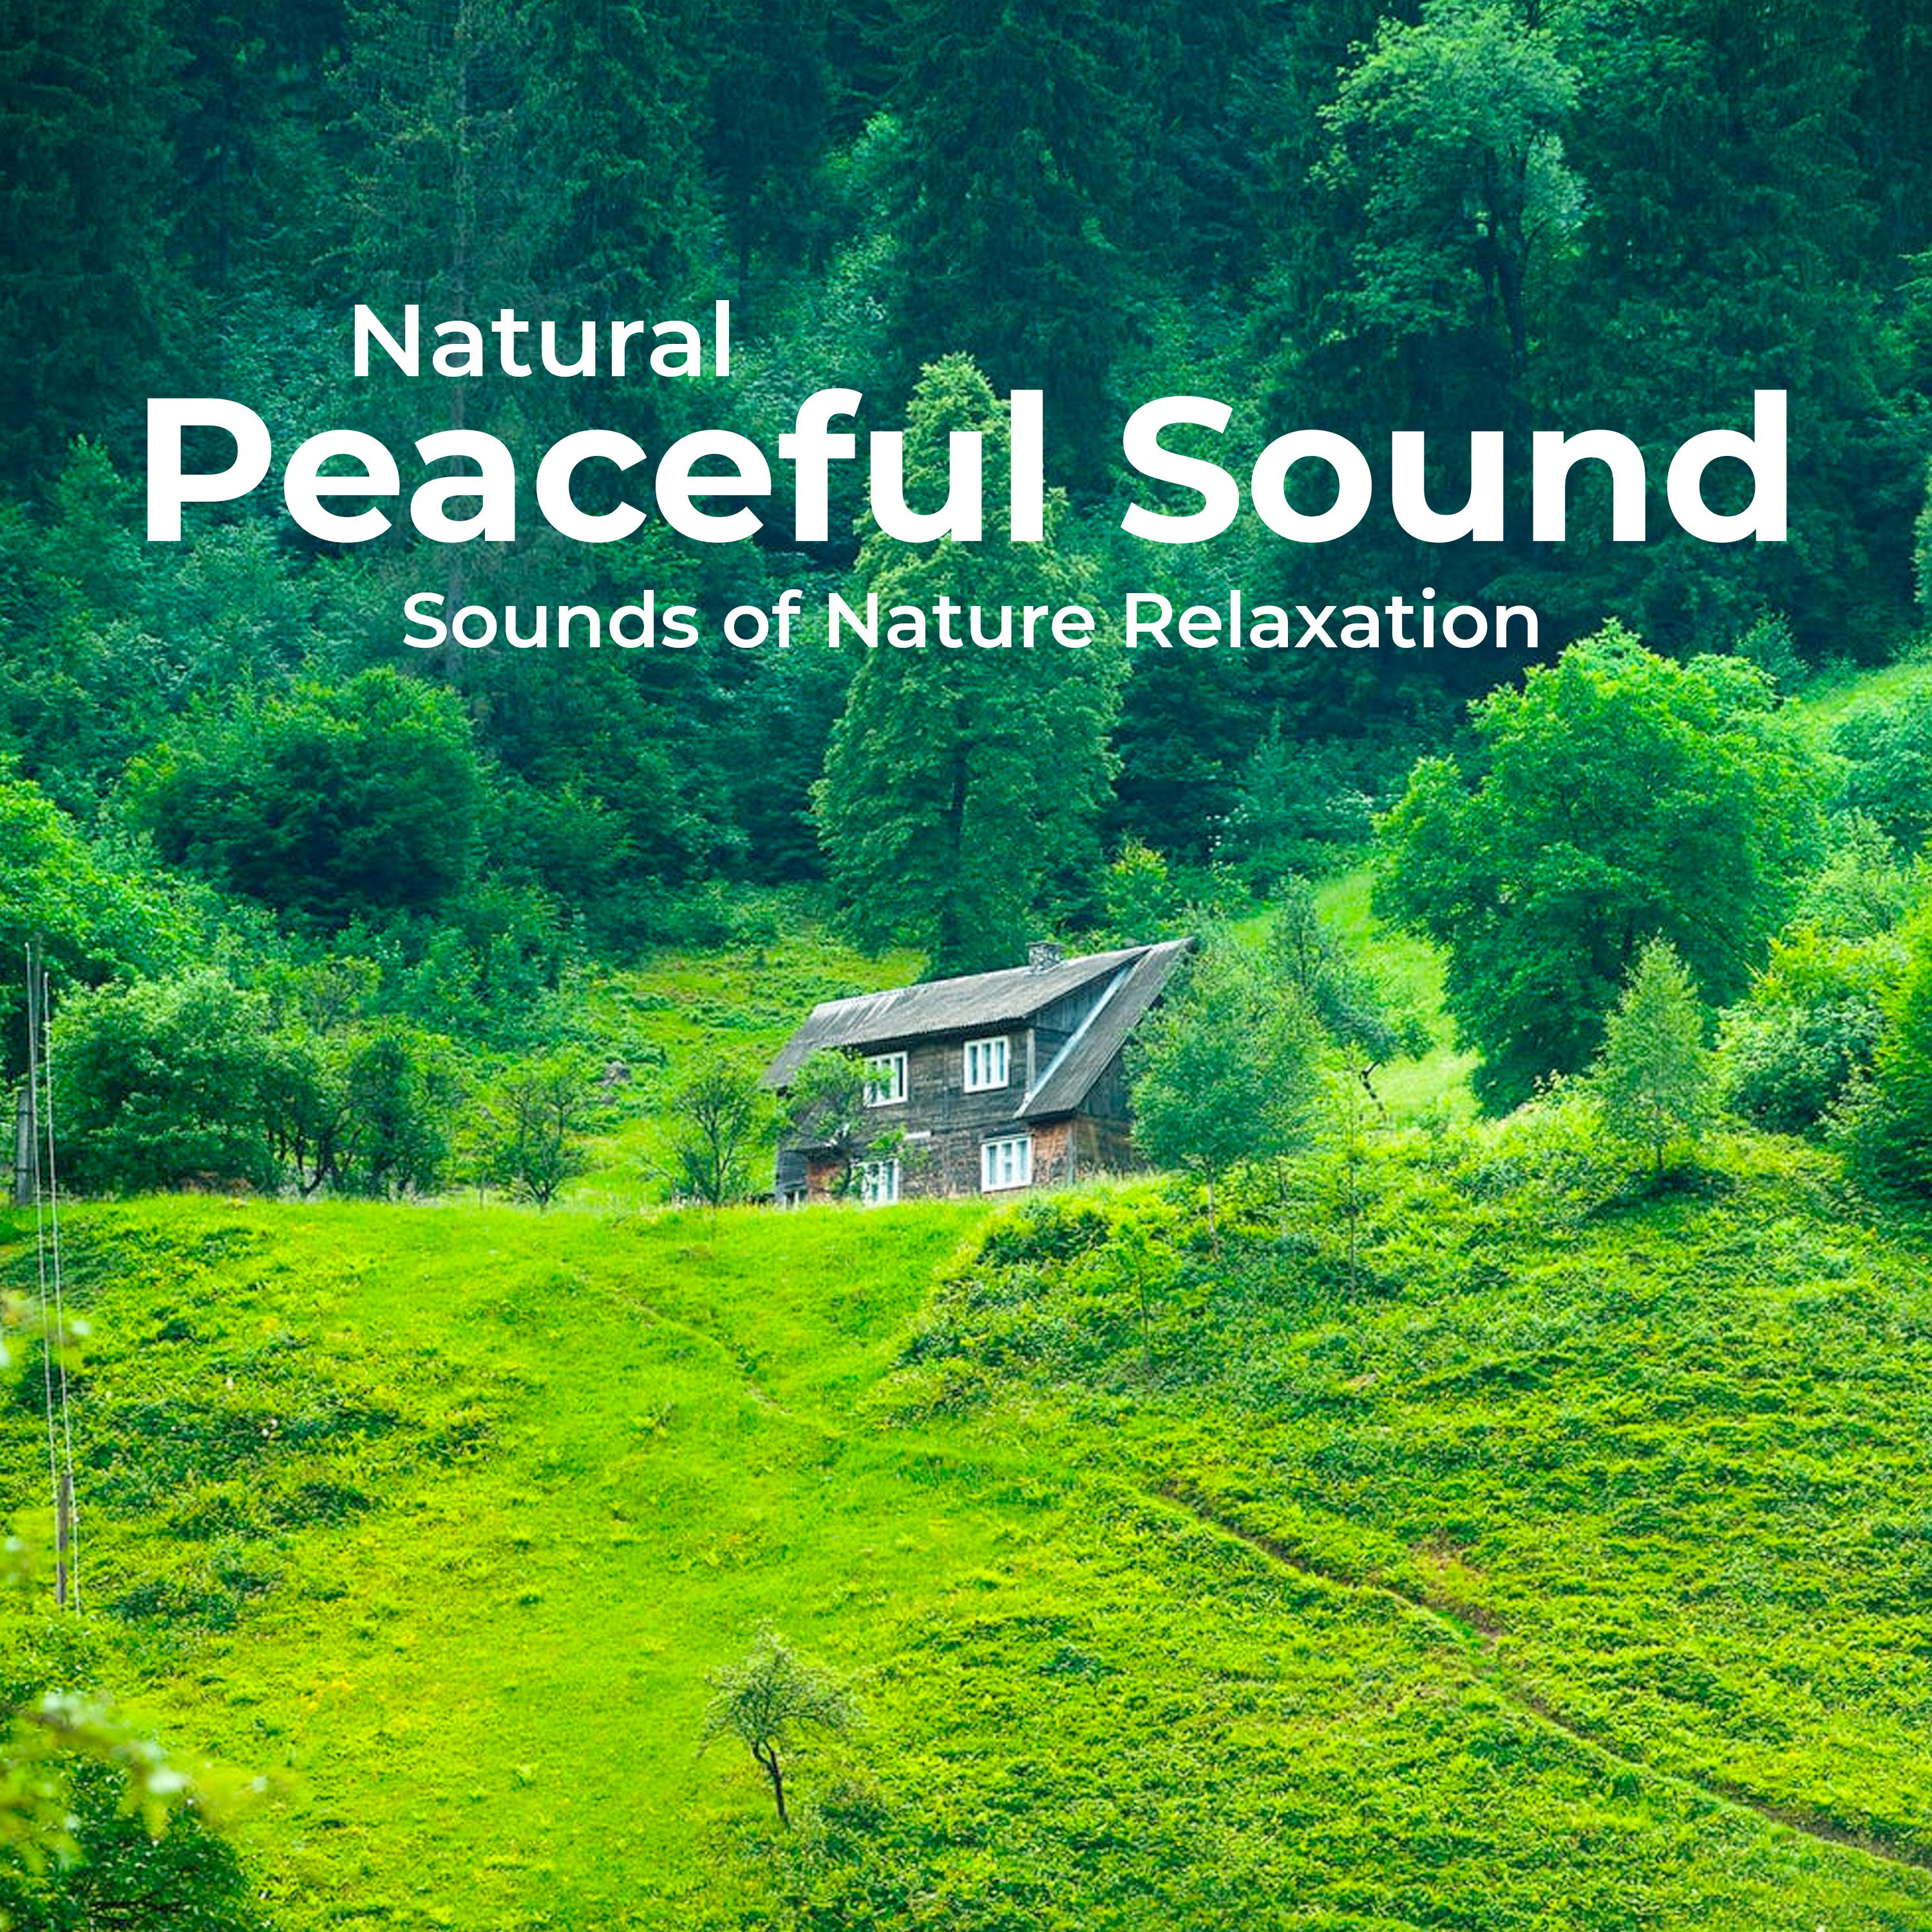 Natural Peaceful Sound